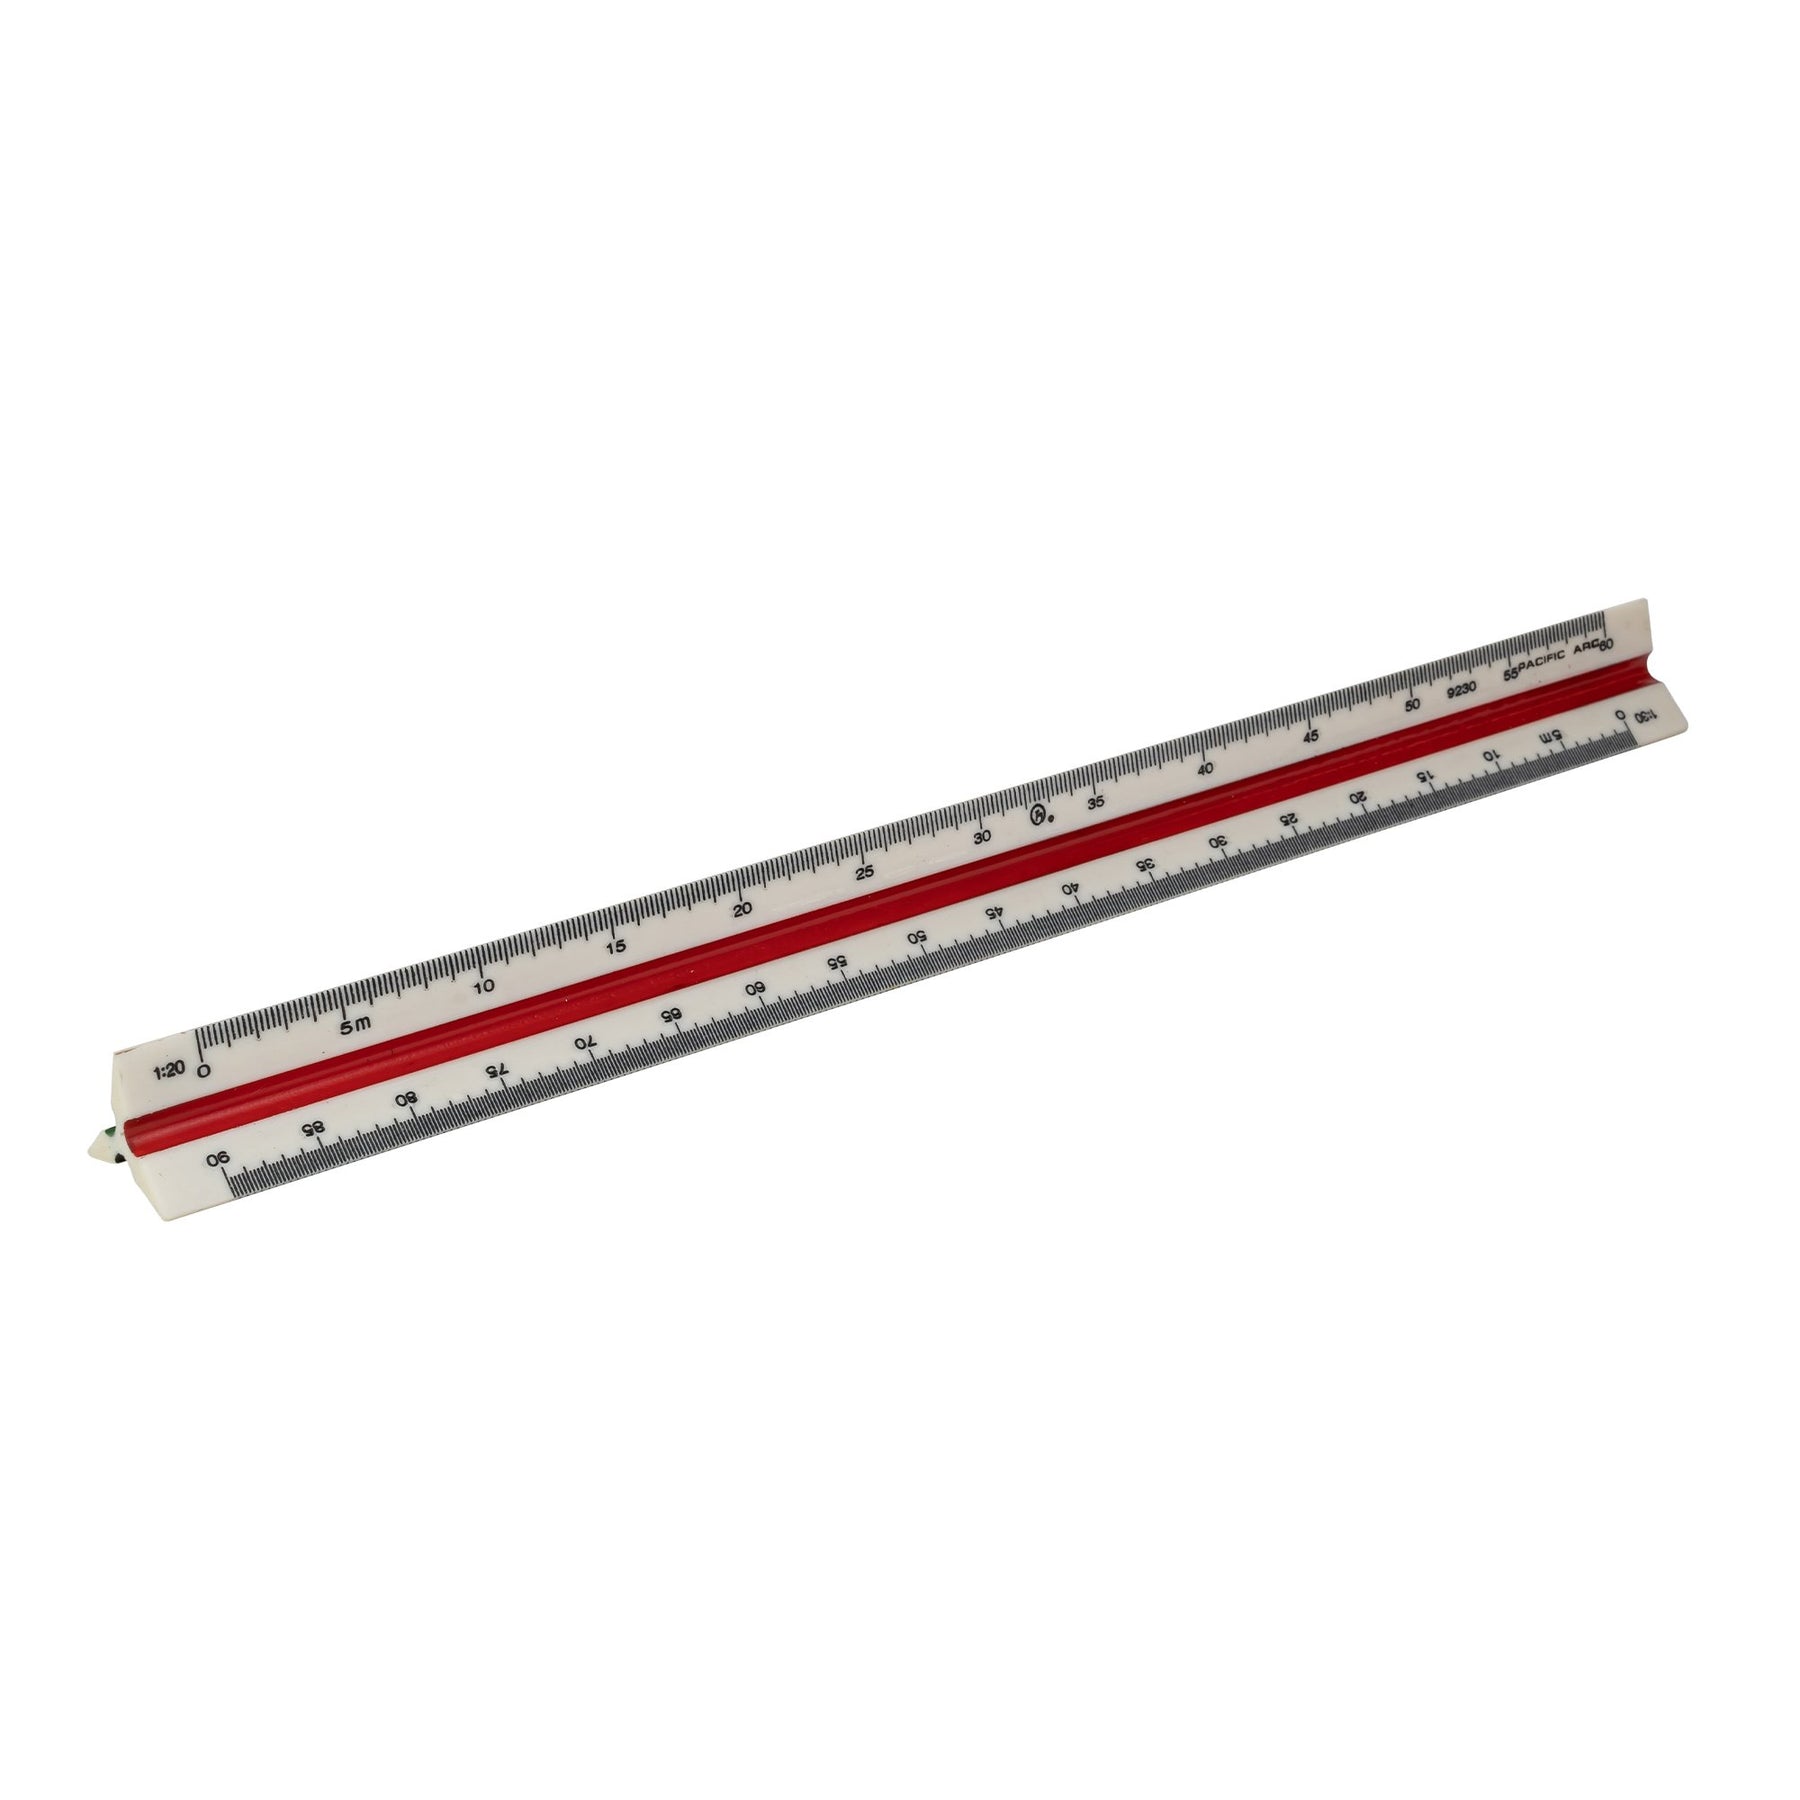 Pacific Arc, Architect Triangle Scale Ruler 12 Inch with Acid Etched Markings Openly Divided by 3/32, 3/16, 1/8, 1/4, 3/8, 1/2, 3/4, 1, 1H, and 3 Inch to The Foot